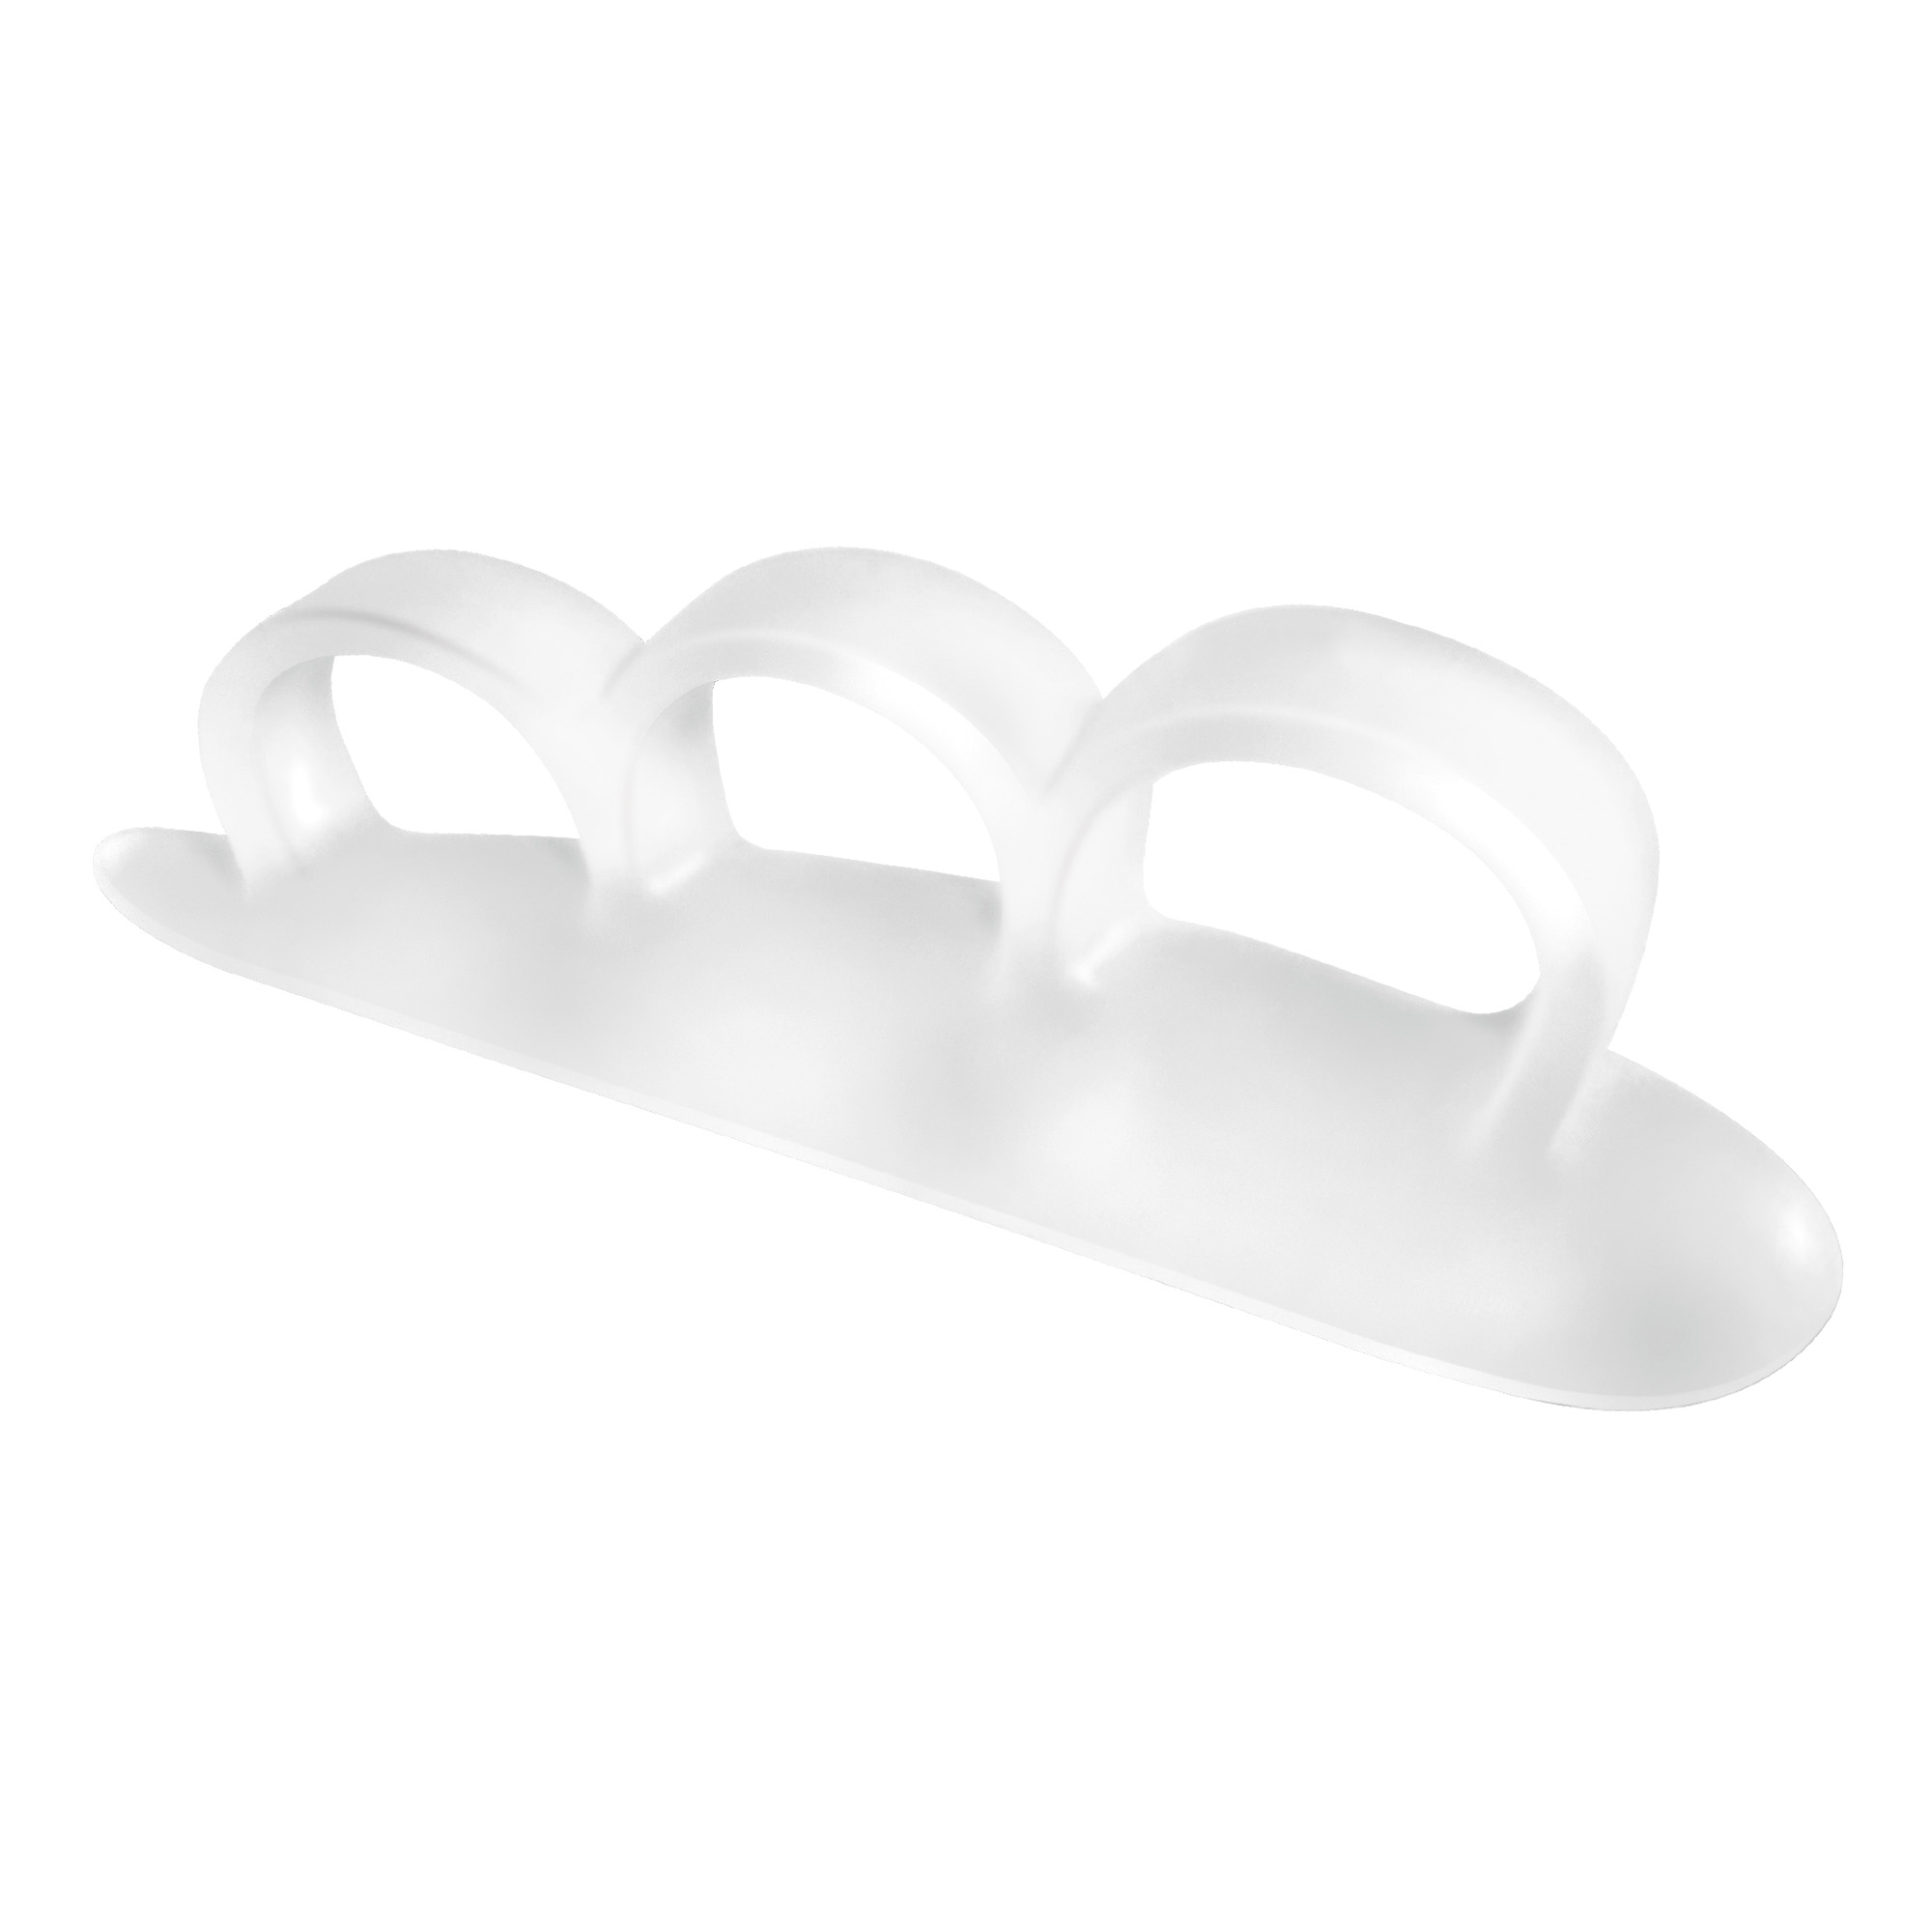 Gel cushion with toe rings - size Small for left foot 1 pc